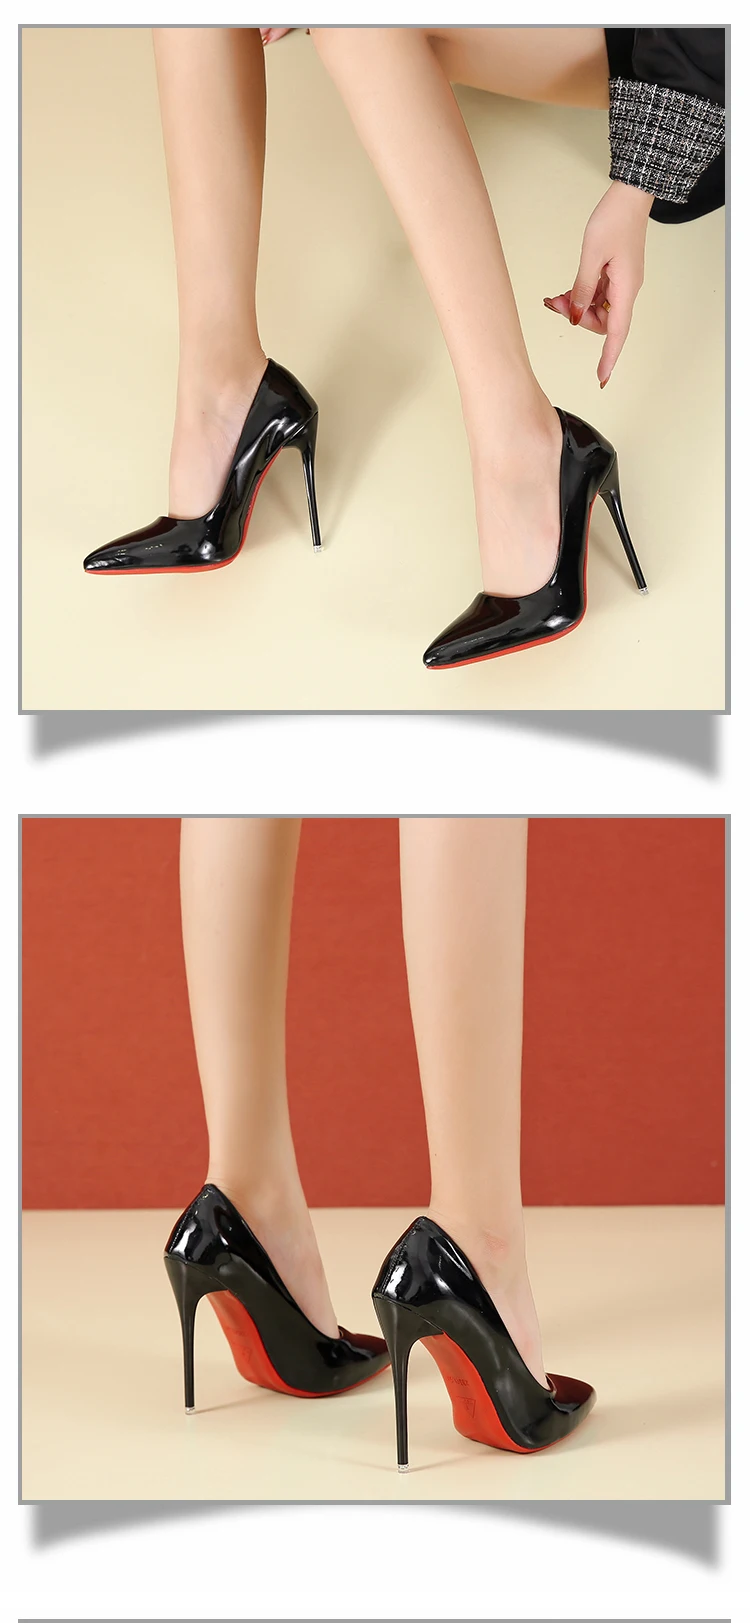 Women Shoes Red Sole High Heels Sexy Pointed Toe 12cm Pumps Wedding Dress  Shoes Nude Black Color Red Rubber Bottom High Heels